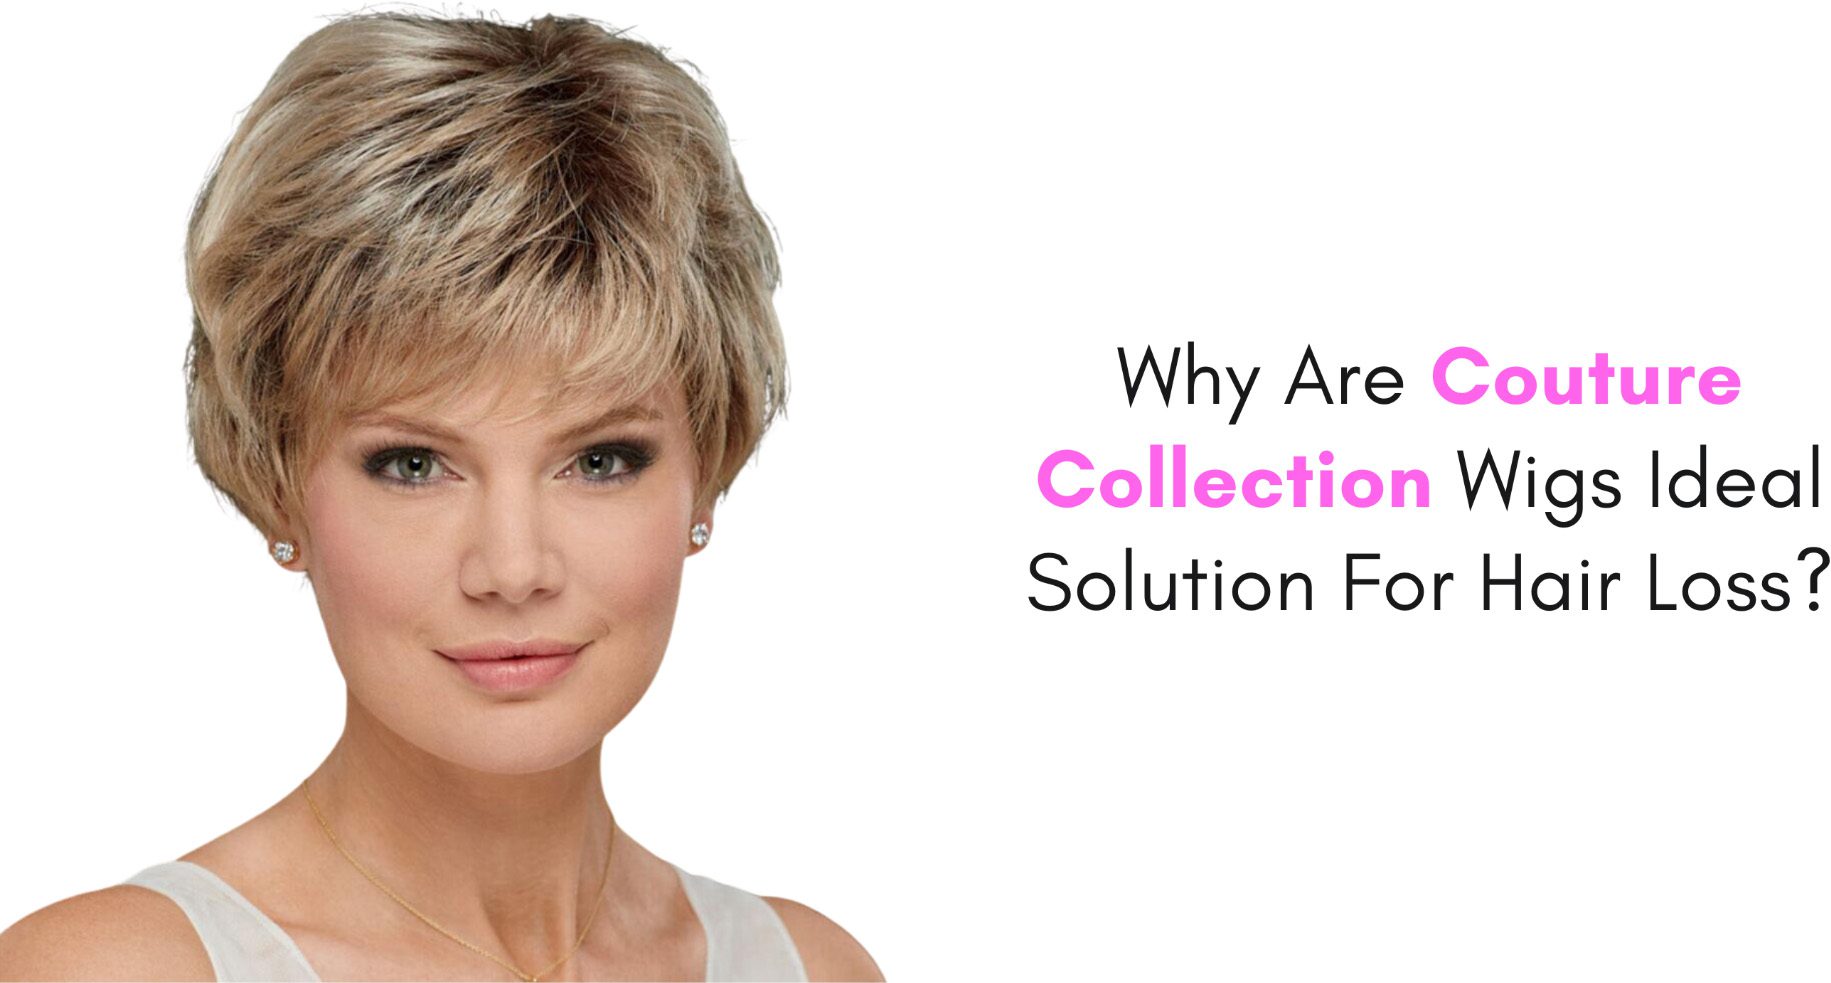 Why Are Couture Collection Wigs The Ideal Solution For Hair Loss?